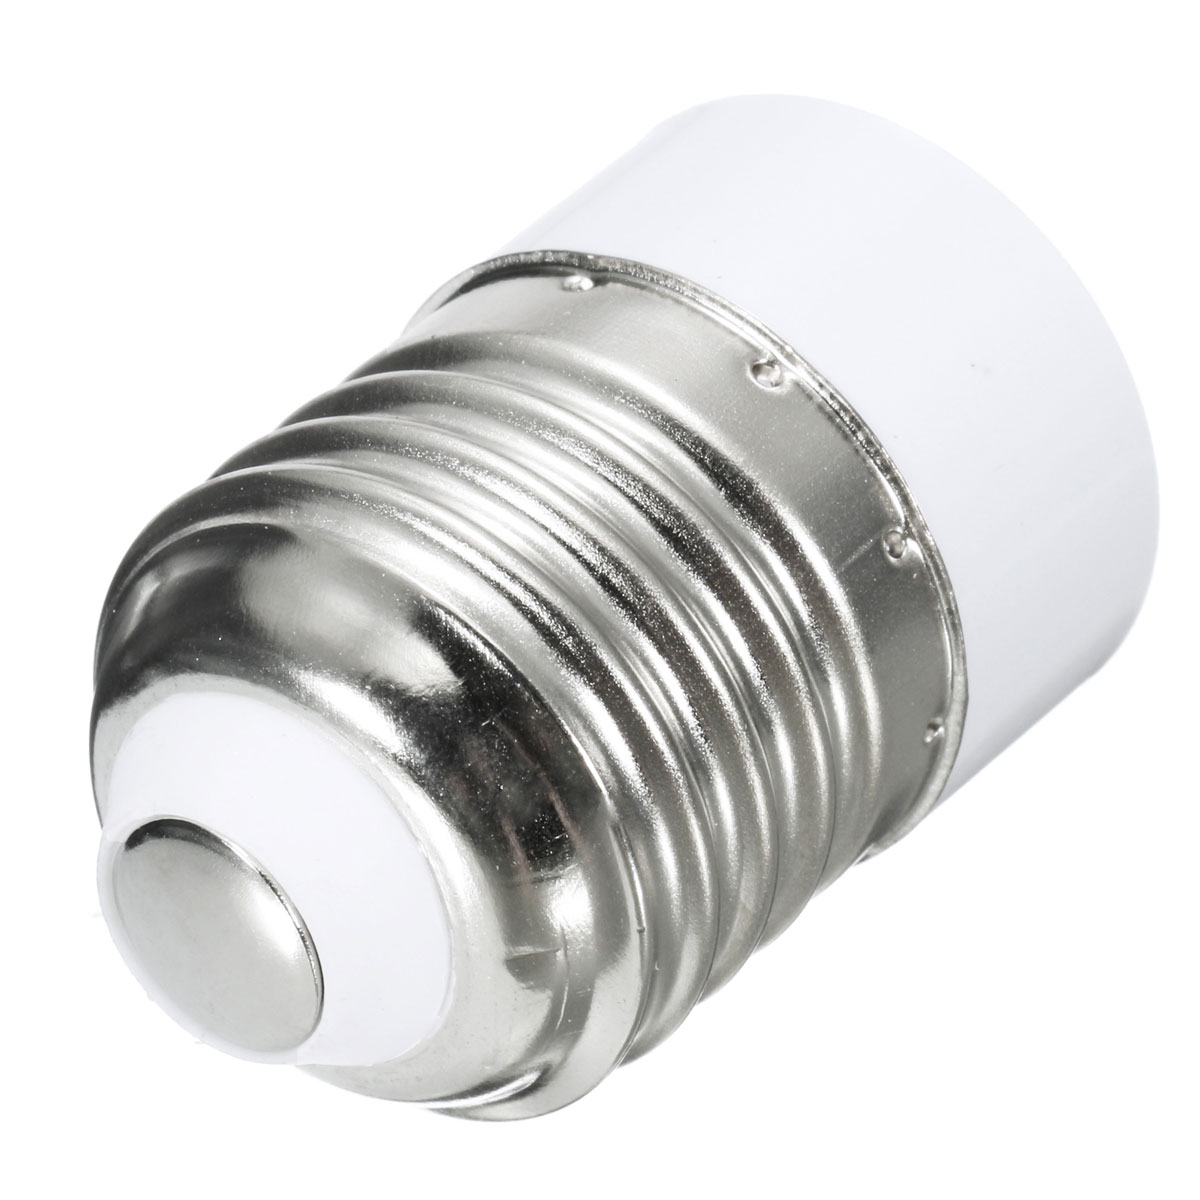 Find  E27 to E14 Base LED Light Lamp Bulb Adapter Adaptor Converter Screw Socket Fit for Sale on Gipsybee.com with cryptocurrencies